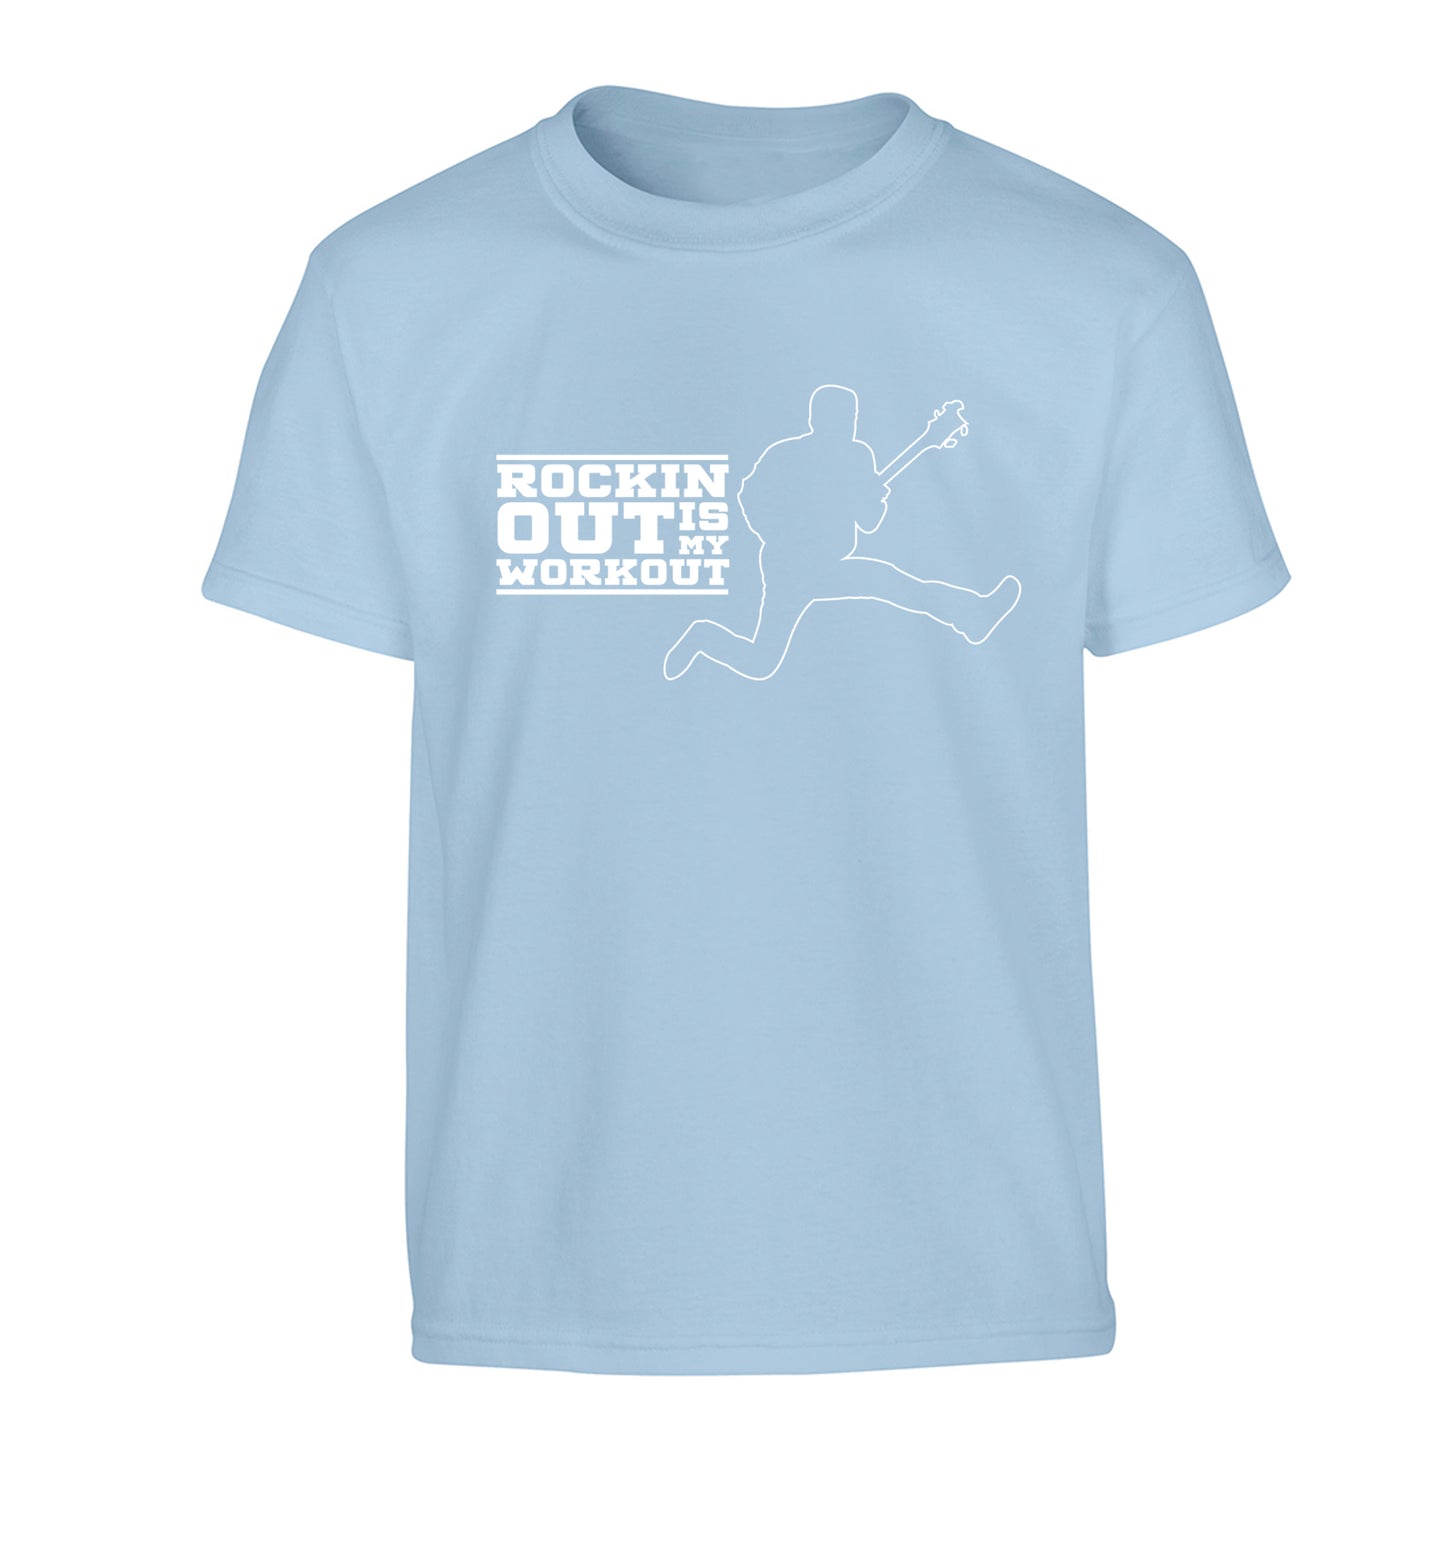 Rockin out is my workout Children's light blue Tshirt 12-13 Years